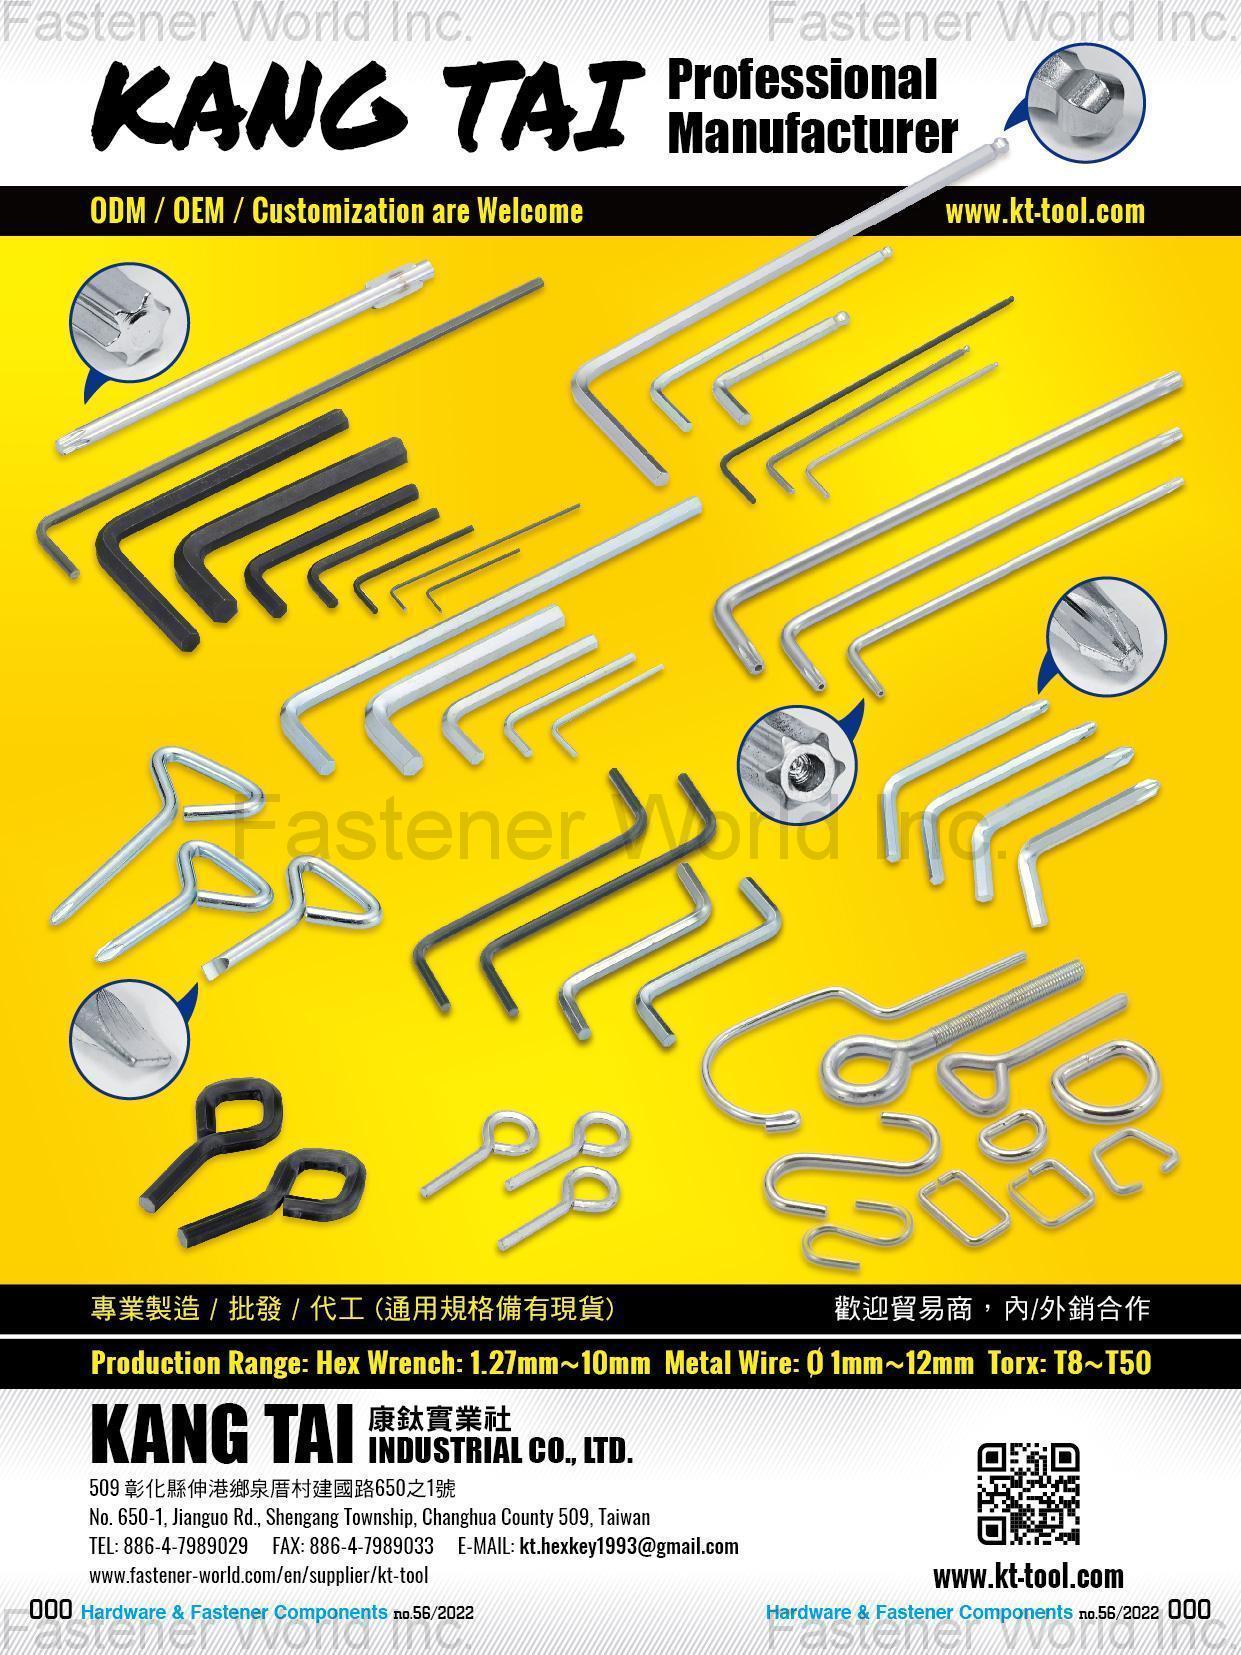 KANG TAI INDUSTRIAL CO., LTD. , KT-TOOL Hex Wrench Professional Manufacturer